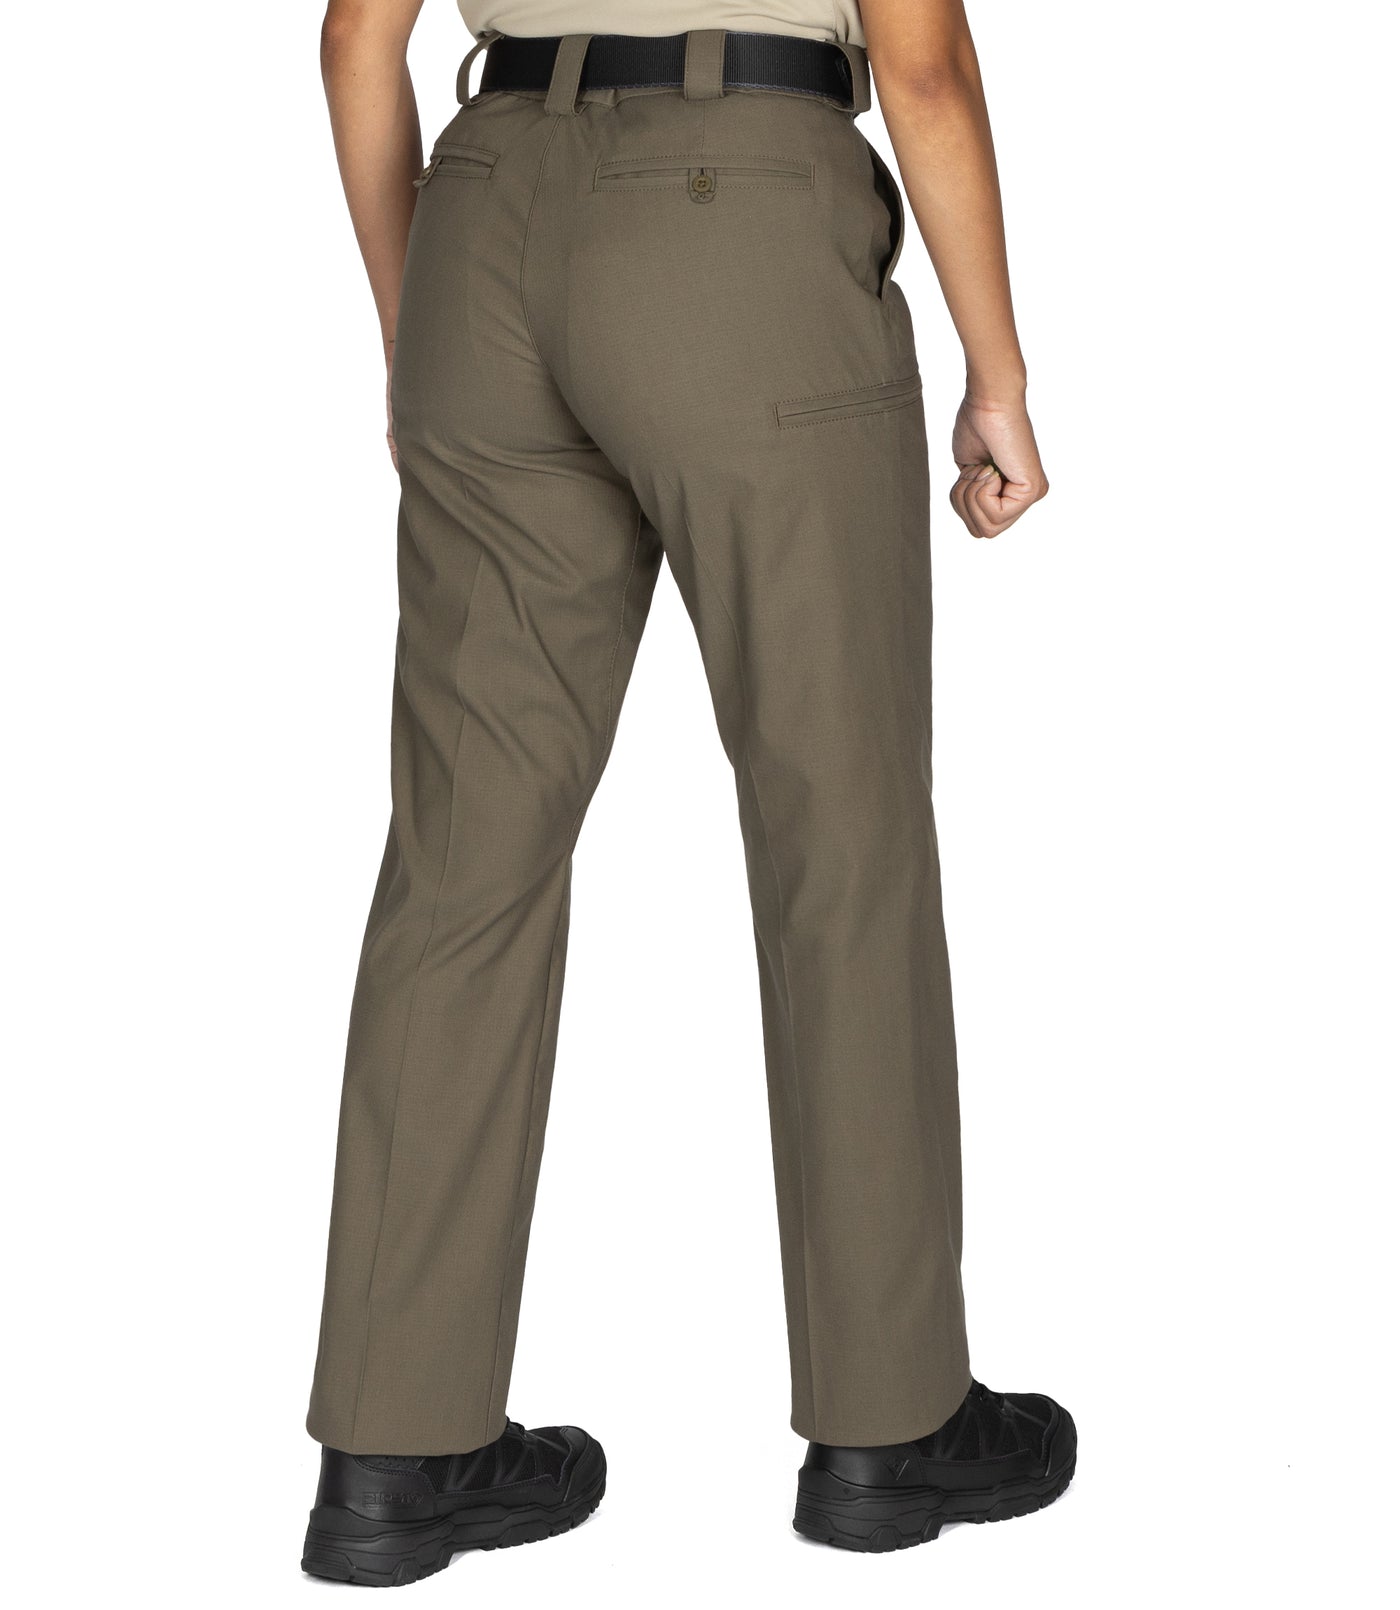 Women's V2 Pro Duty 6 Pocket Pant – First Tactical